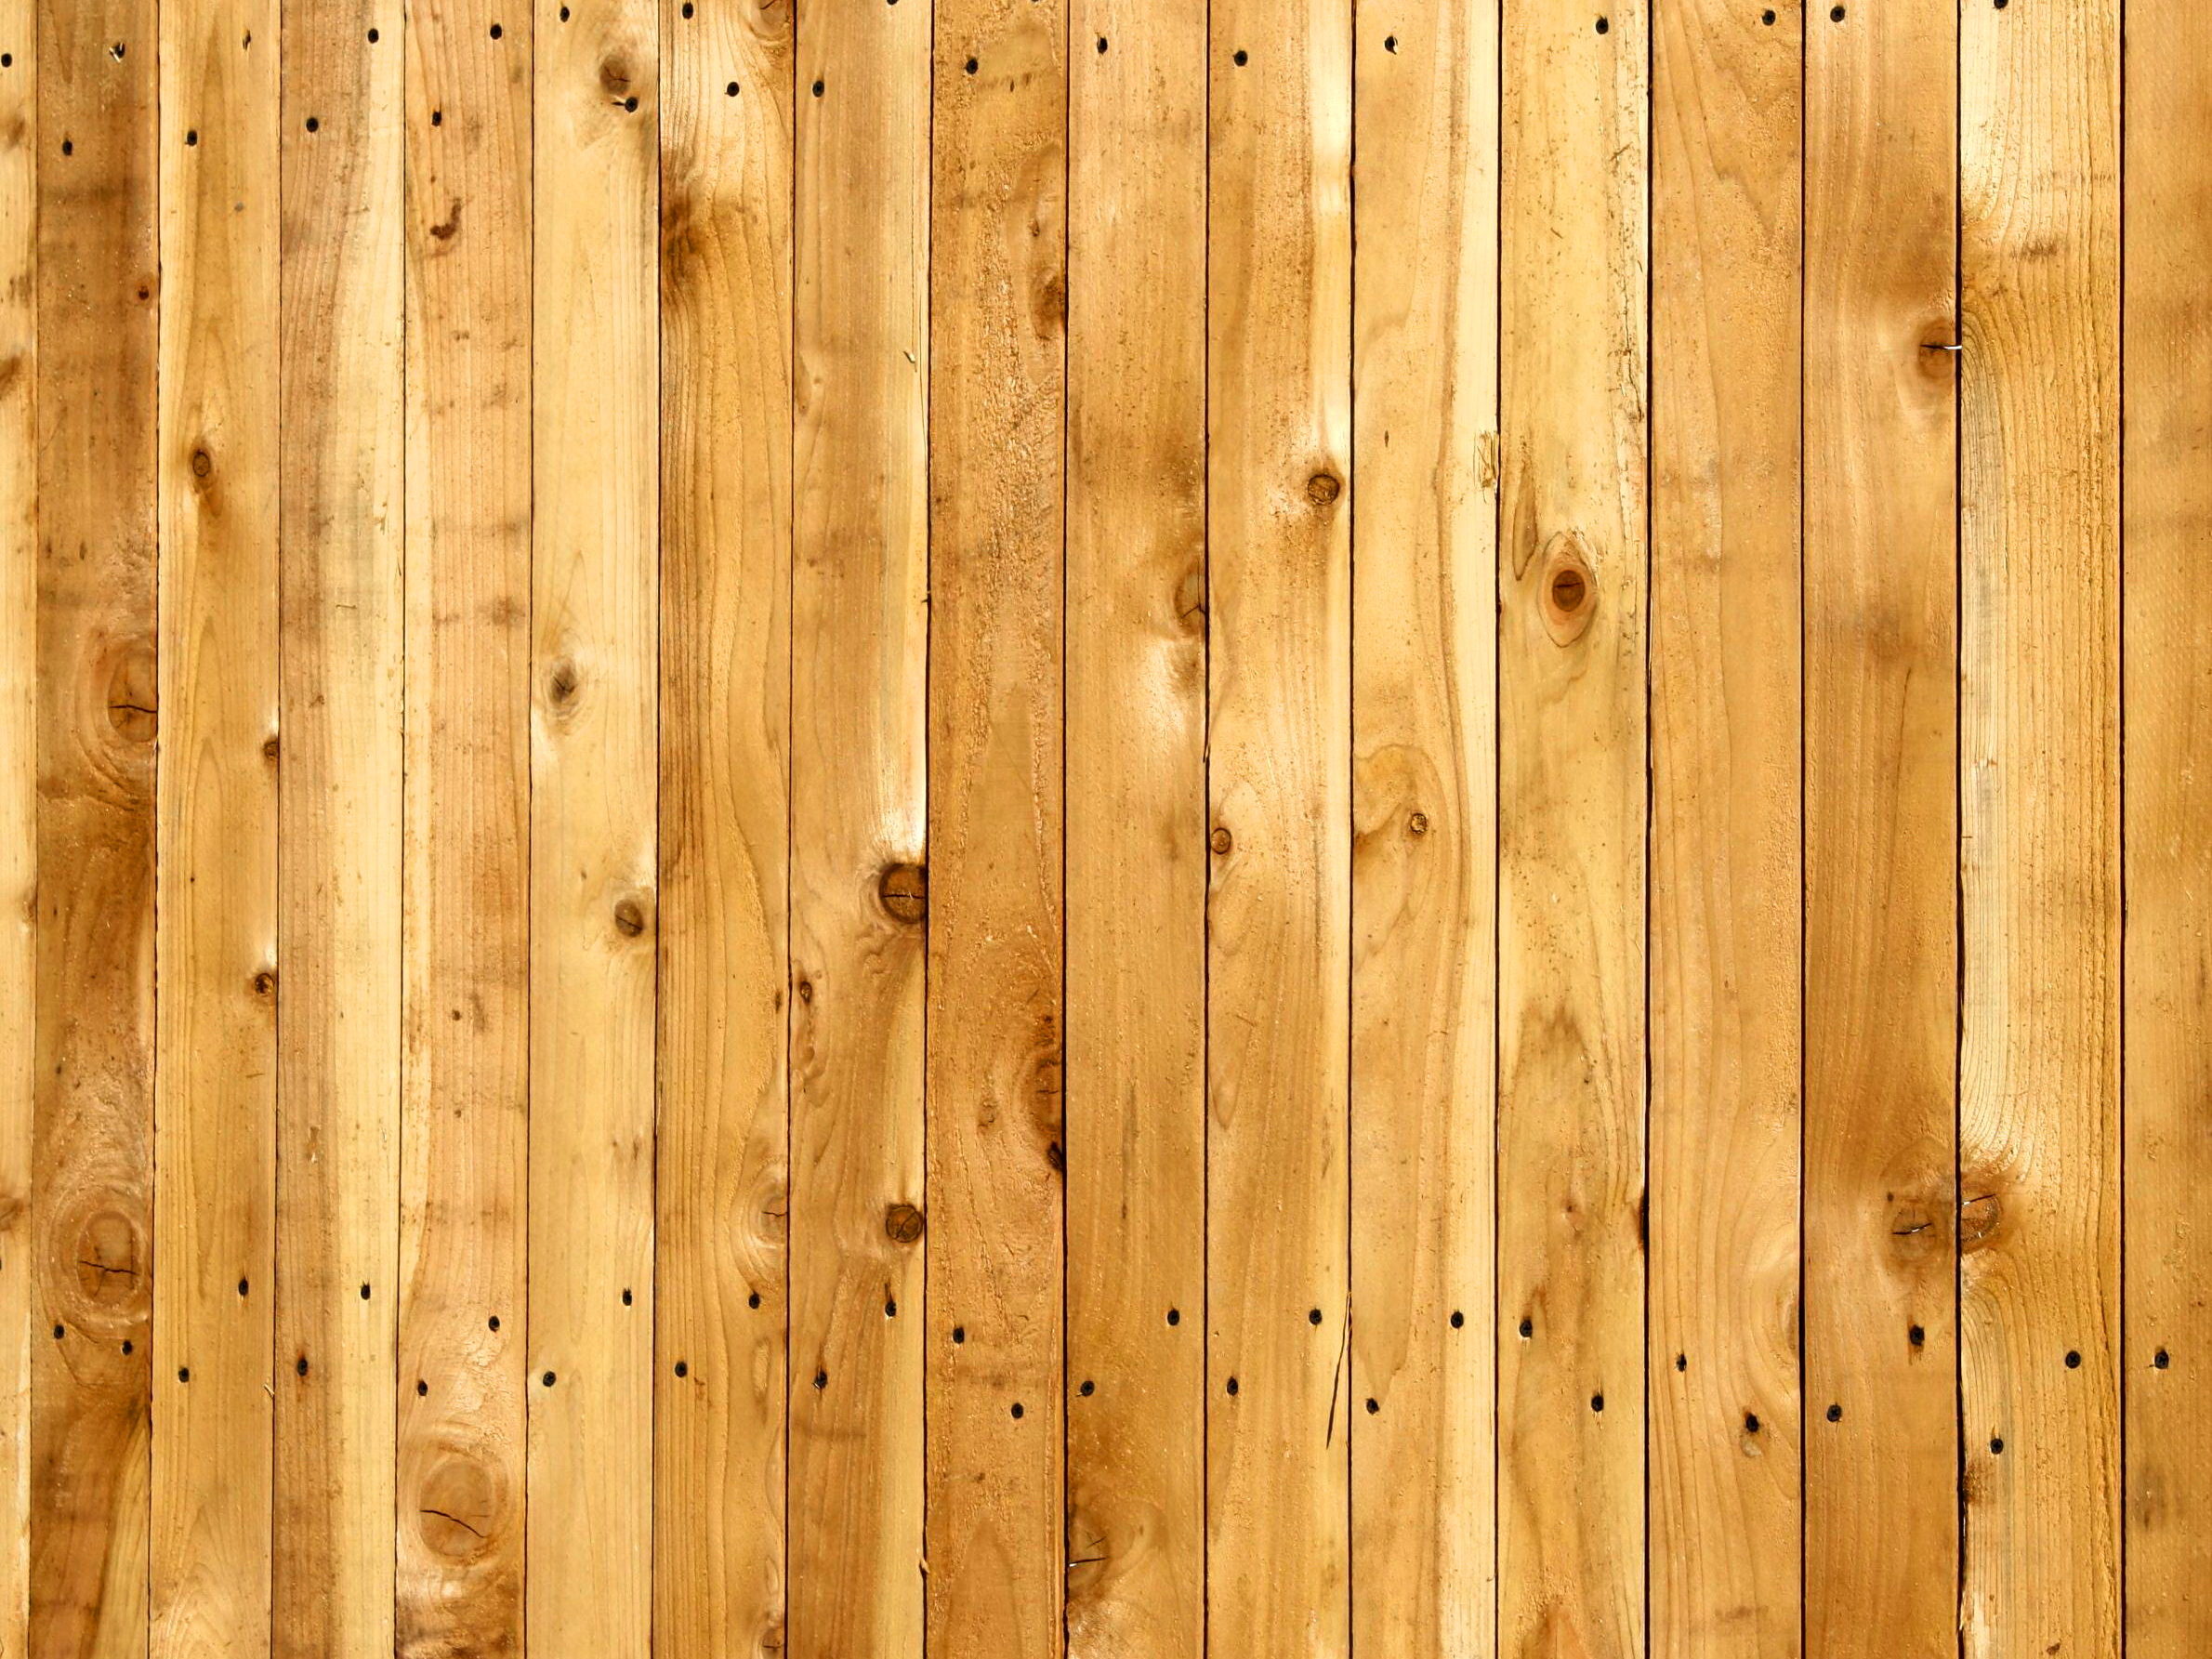 Free picture: wooden planks, wood, fence, texture